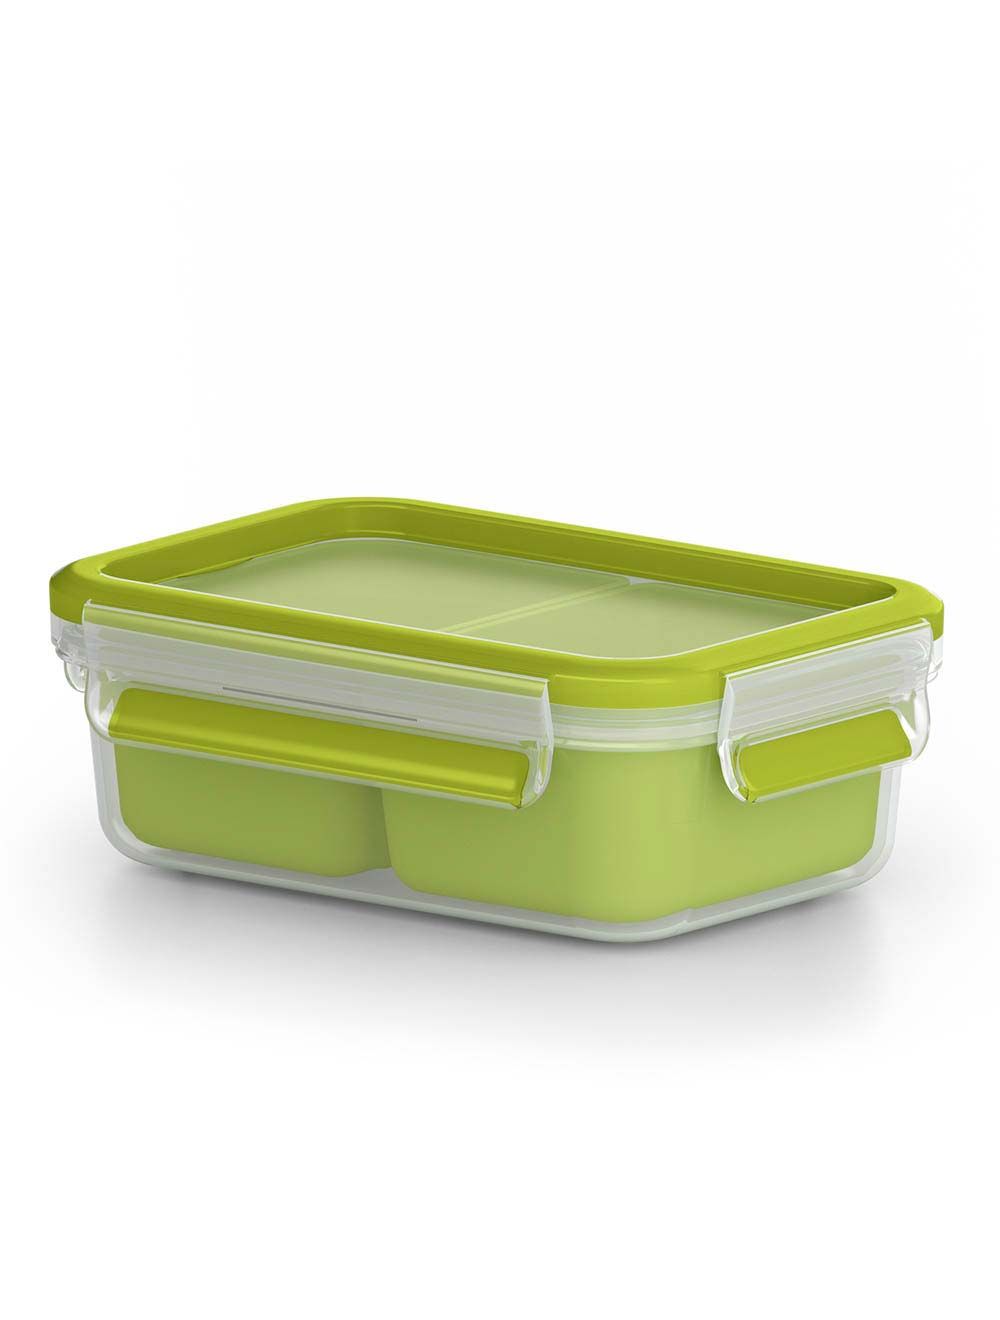 Tefal MasterSeal To Go Snack Box 0.55 Litres Food Container with 2 Inserts K3100612